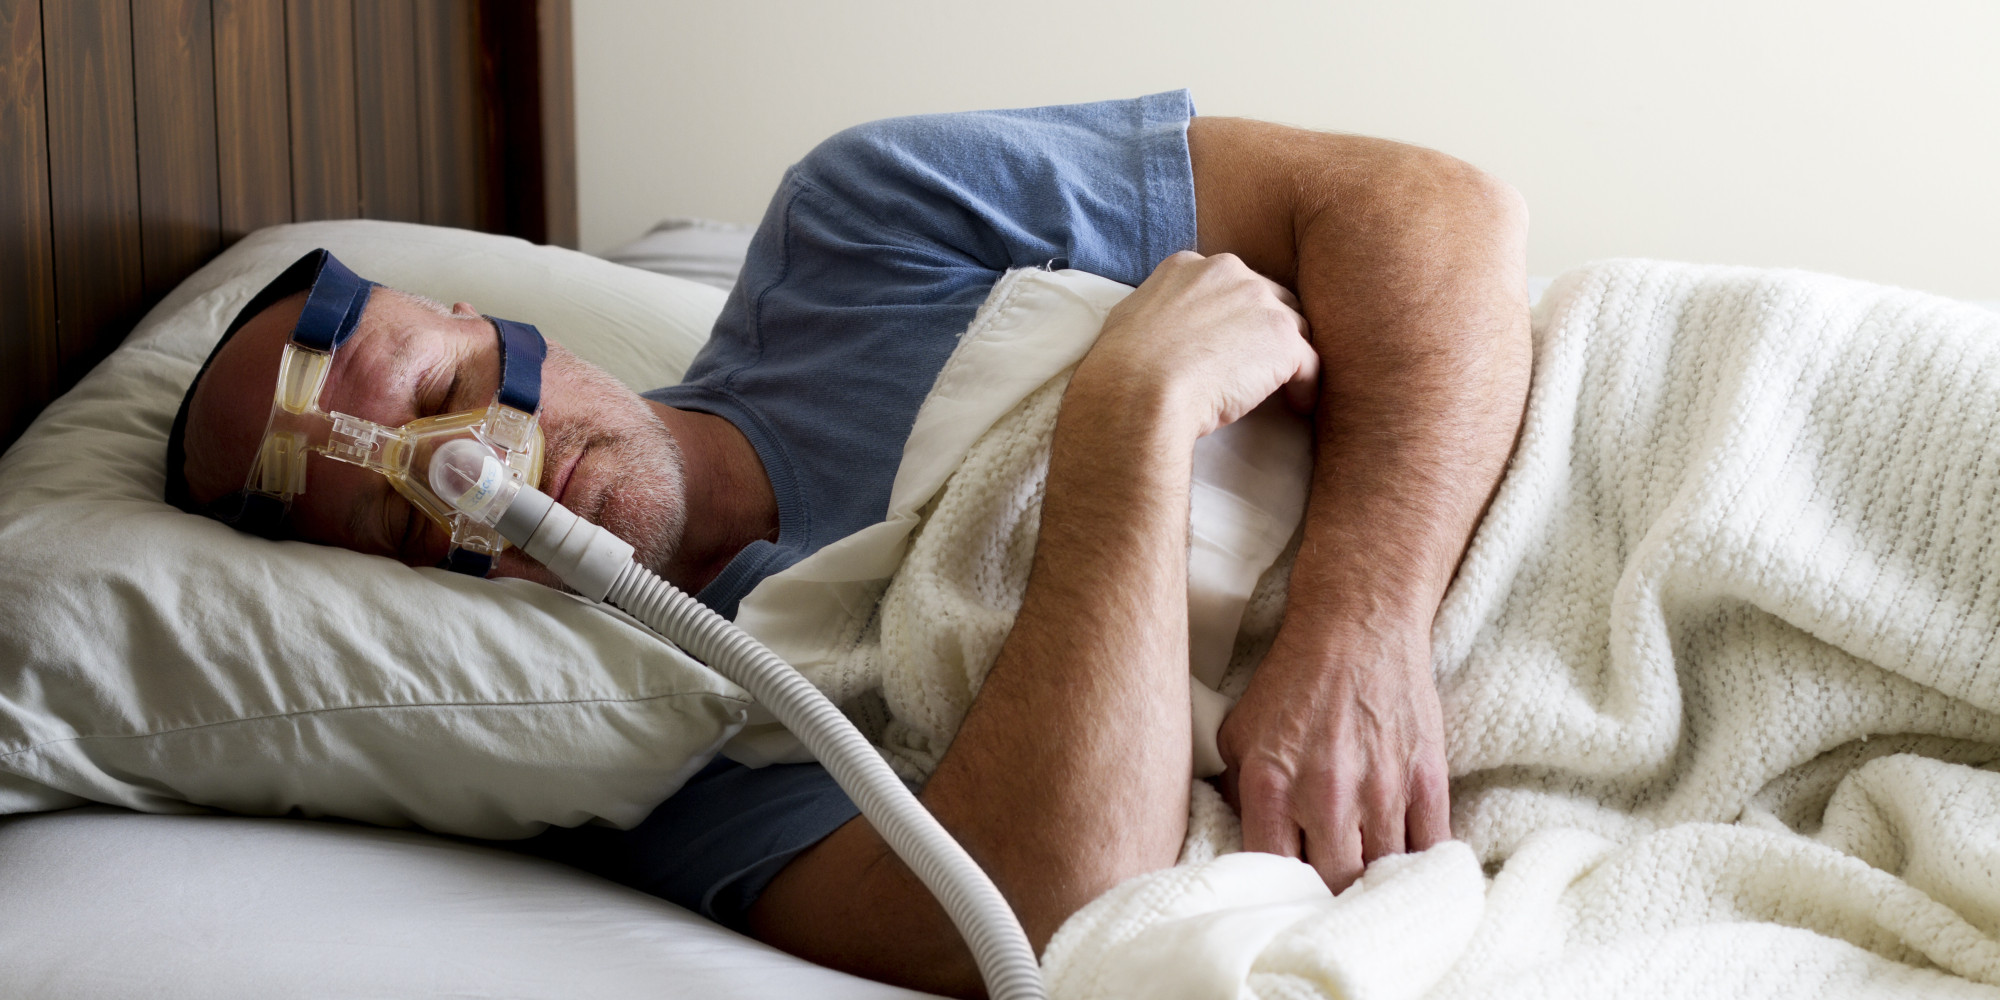 Obstructive Sleep Apnea Treatment Recommendations Released | HuffPost